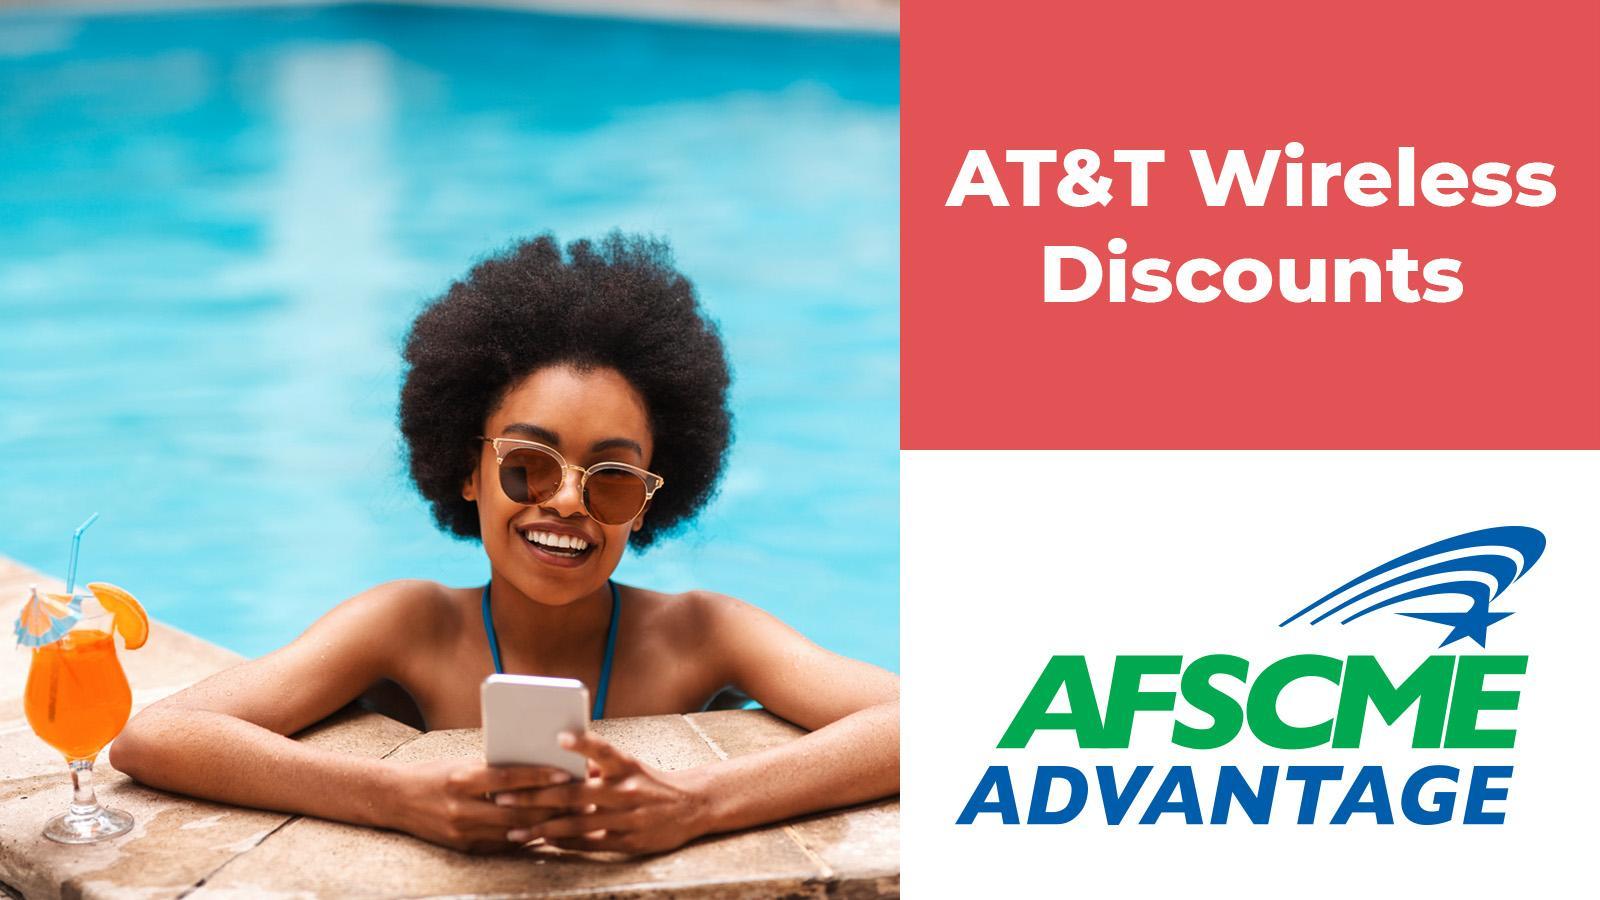 UNION PLUS AT&T WIRELESS DISCOUNTS